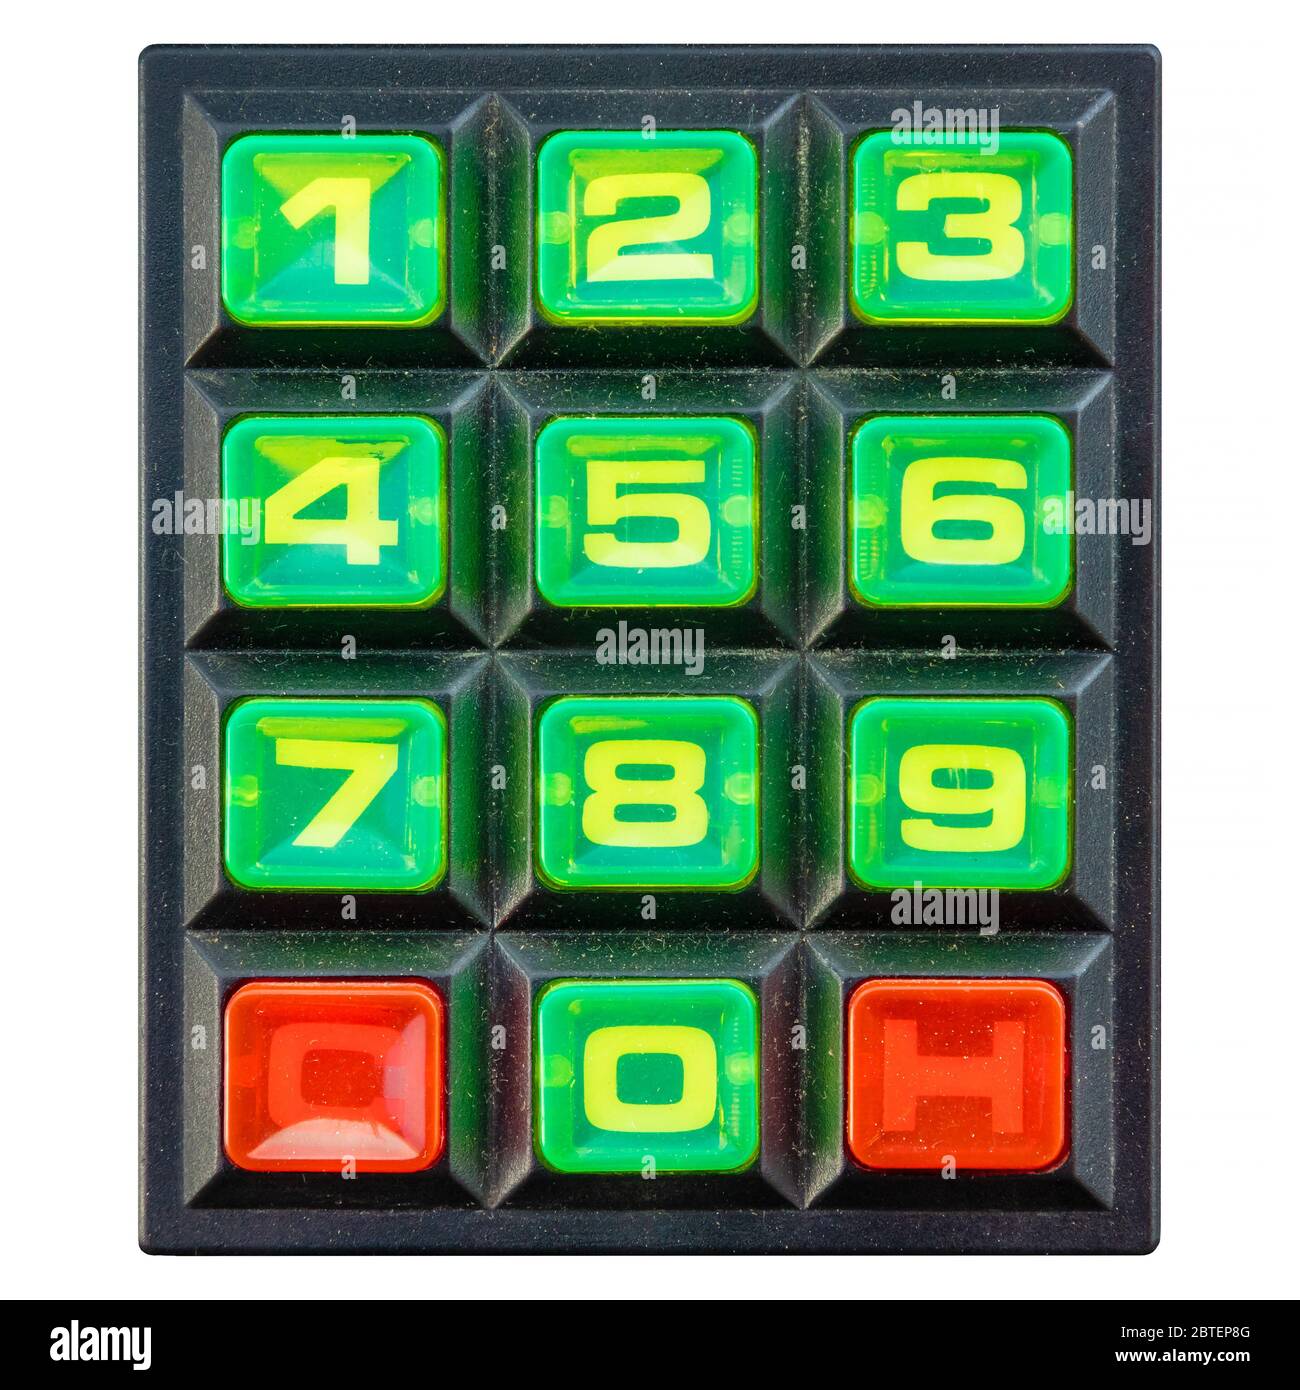 Vintage colorful keypad with green number buttons isolated on a white background Stock Photo